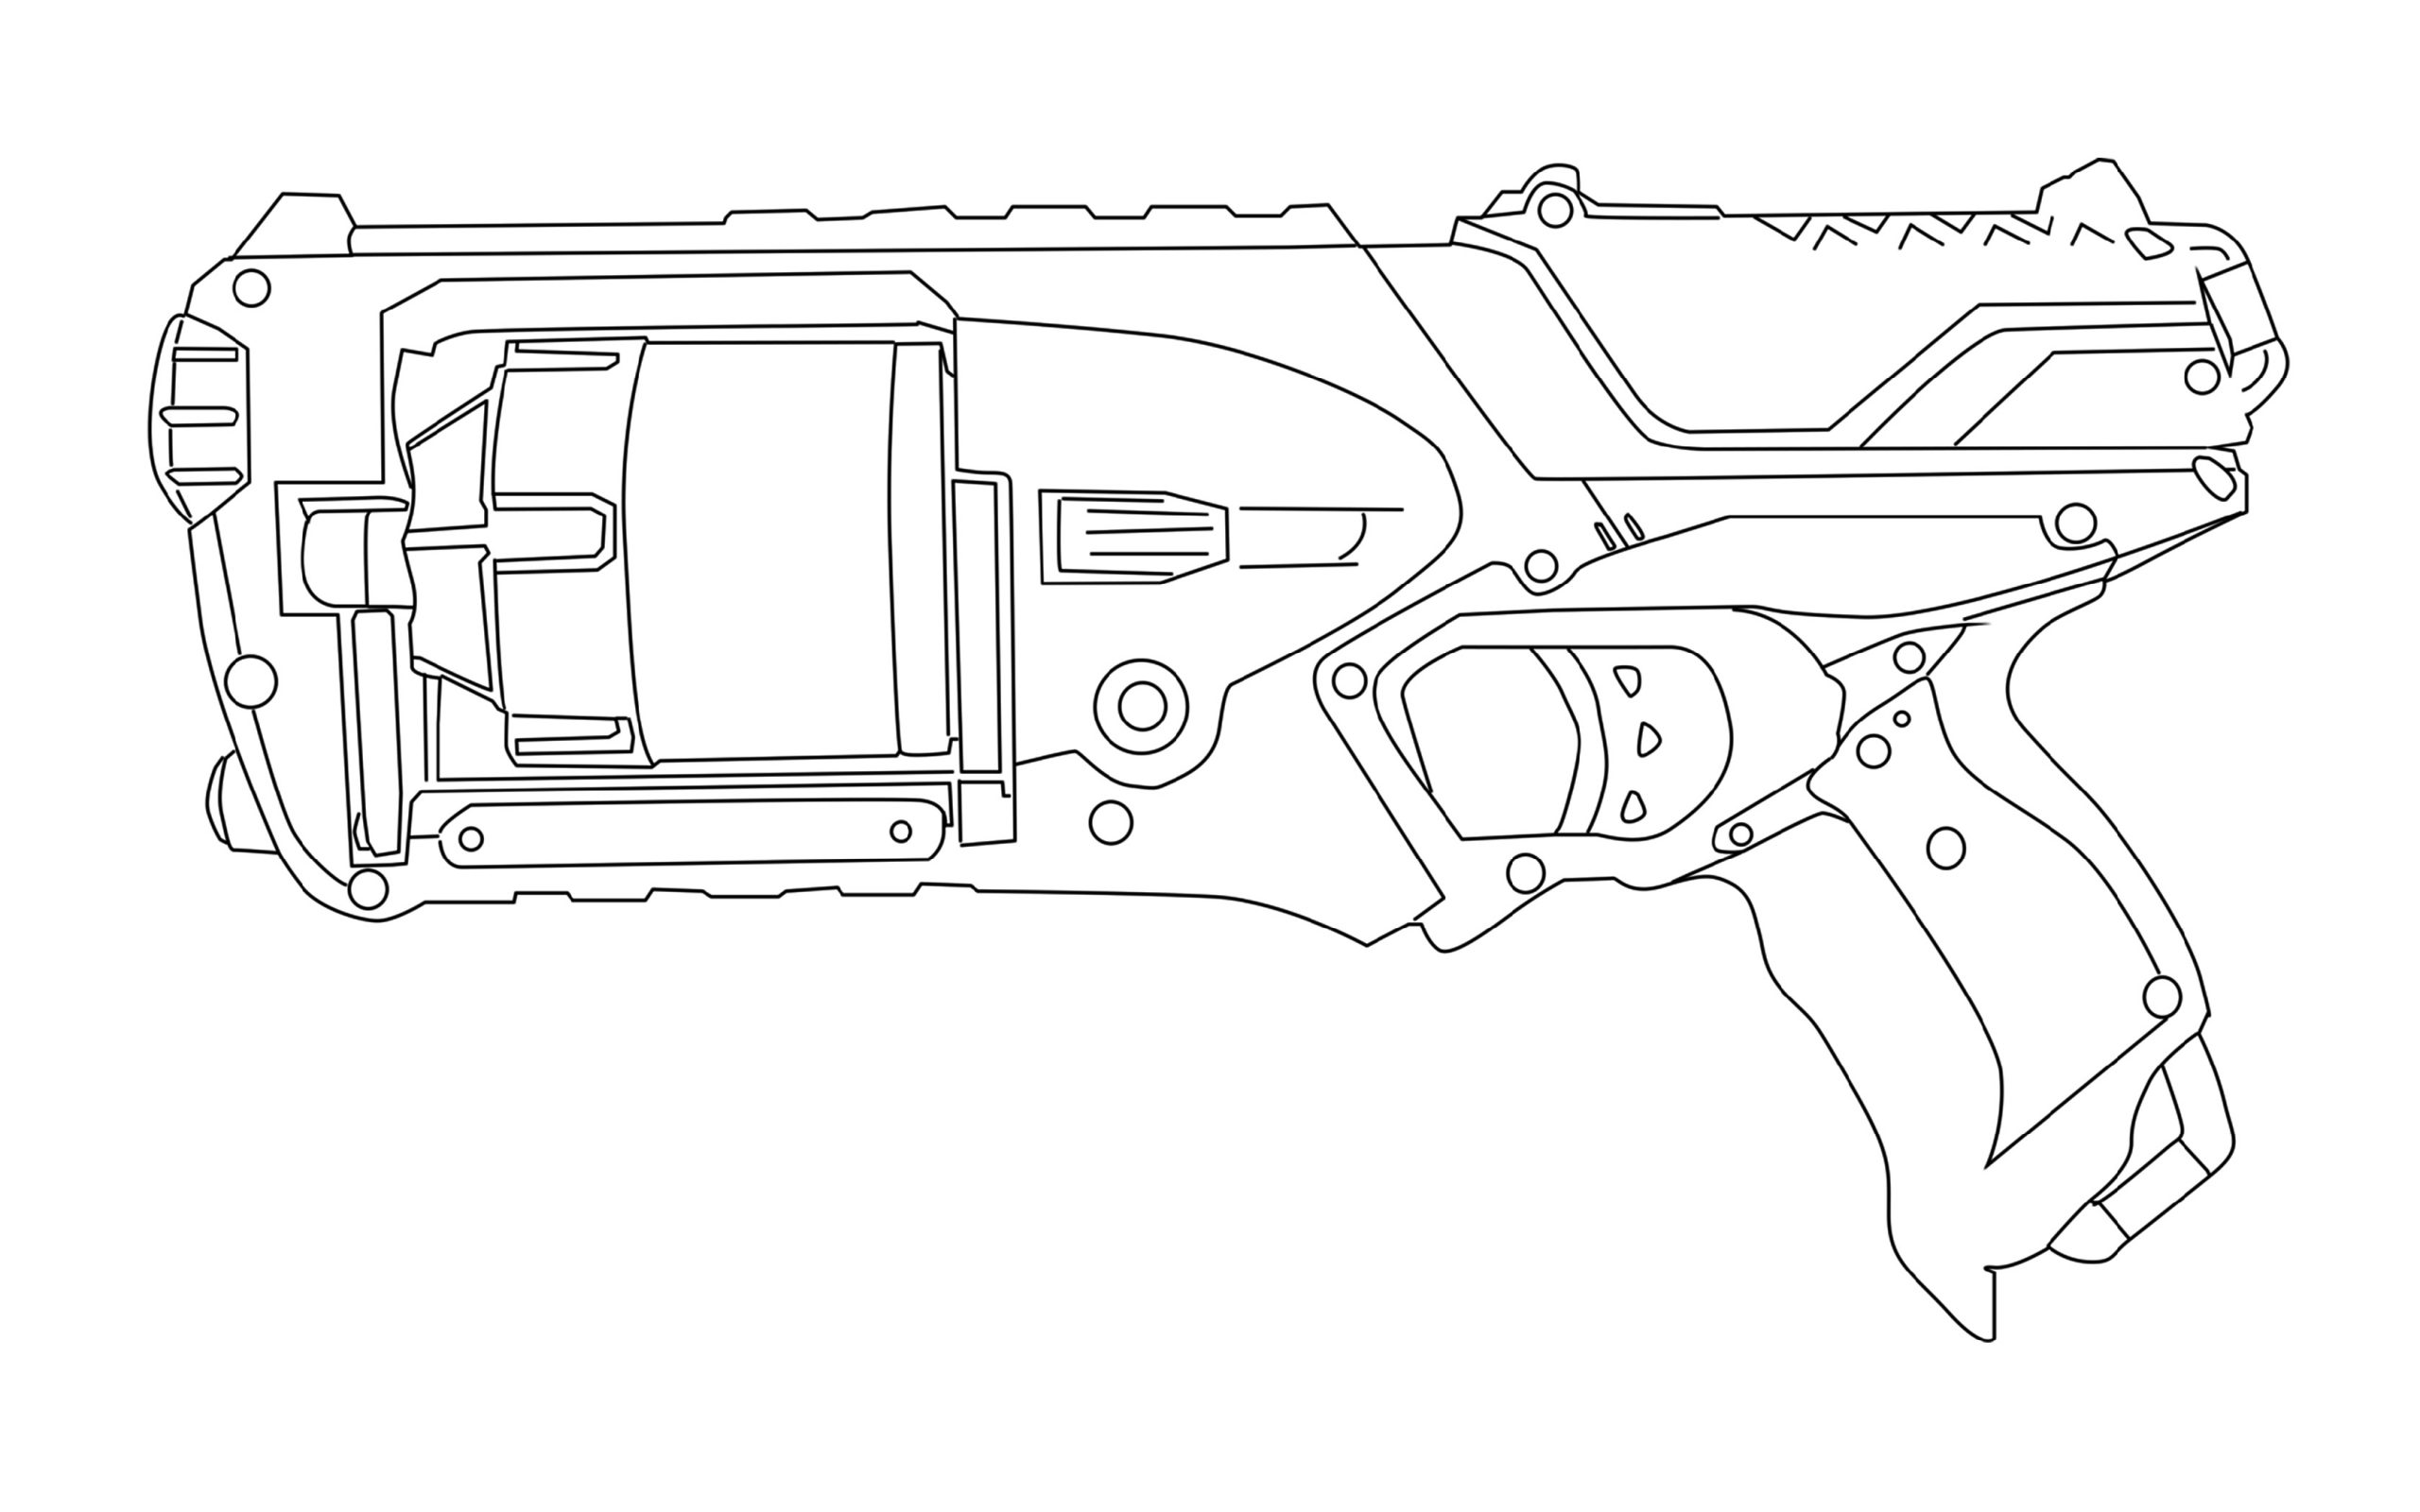 Nerf Gun Coloring Pages   Best Coloring Pages For Kids